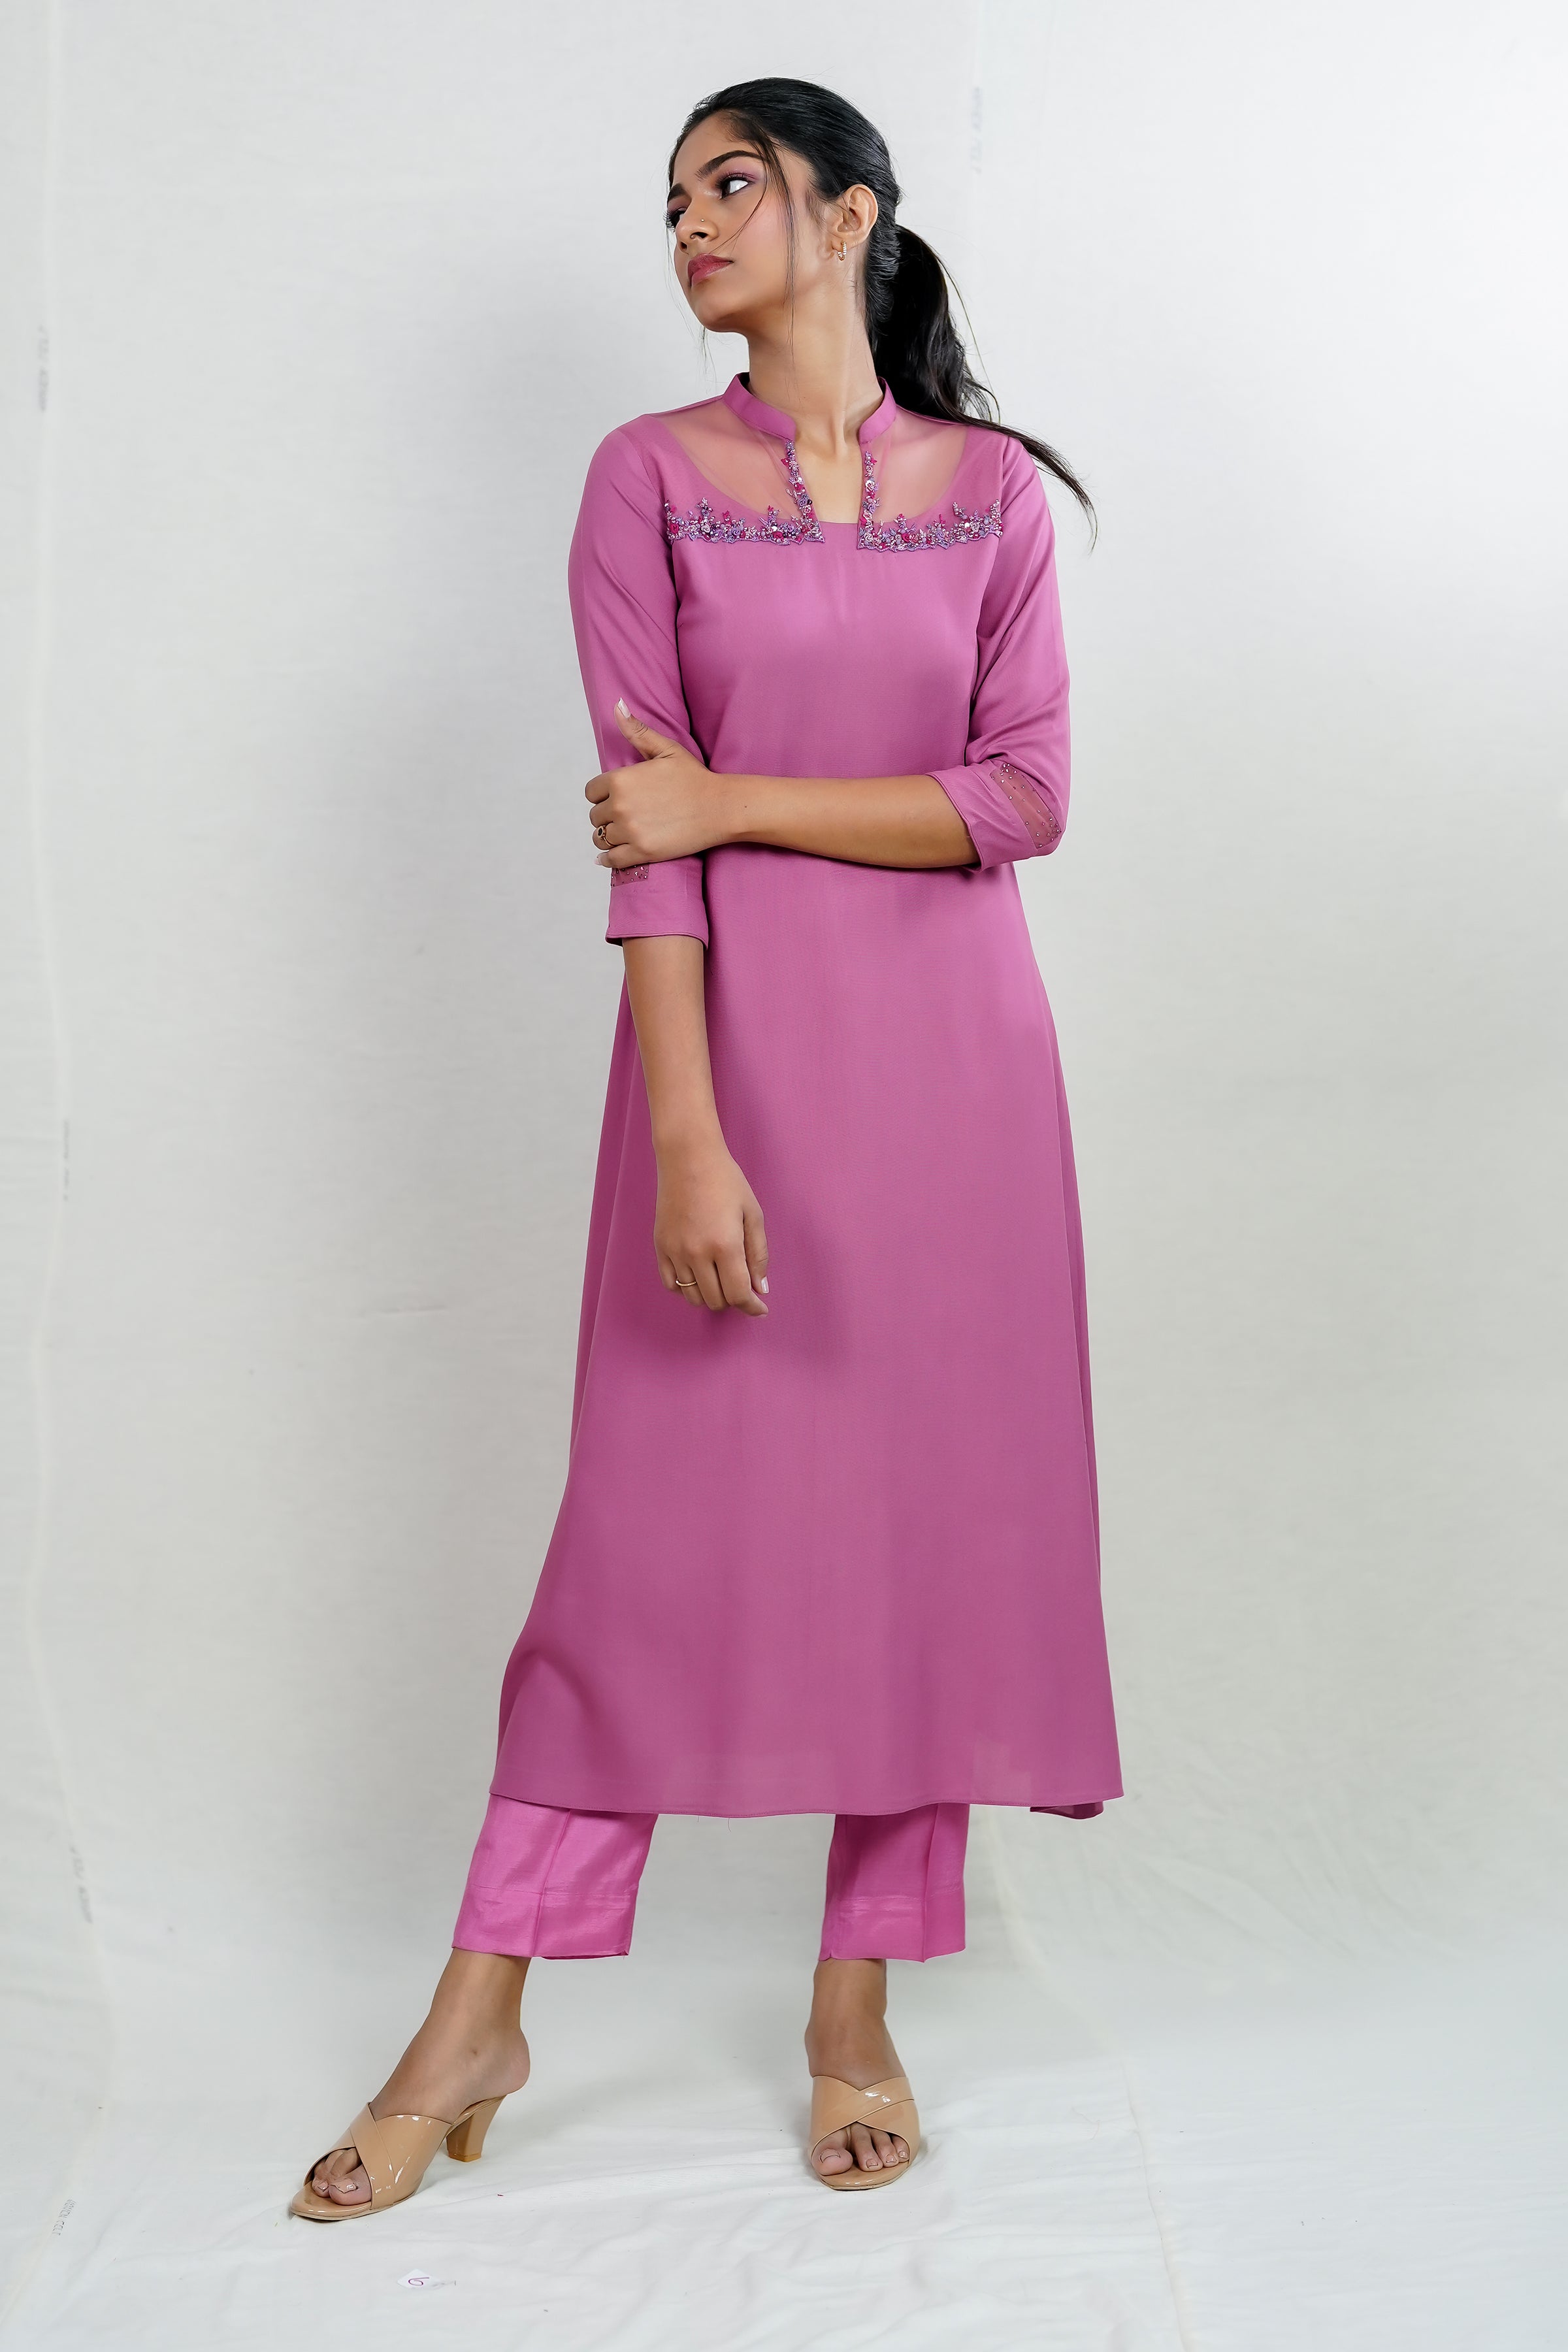 Exclusive Baby Pink Embroidered Party Wear Kurti : 52430 - Kurtis & Tunics